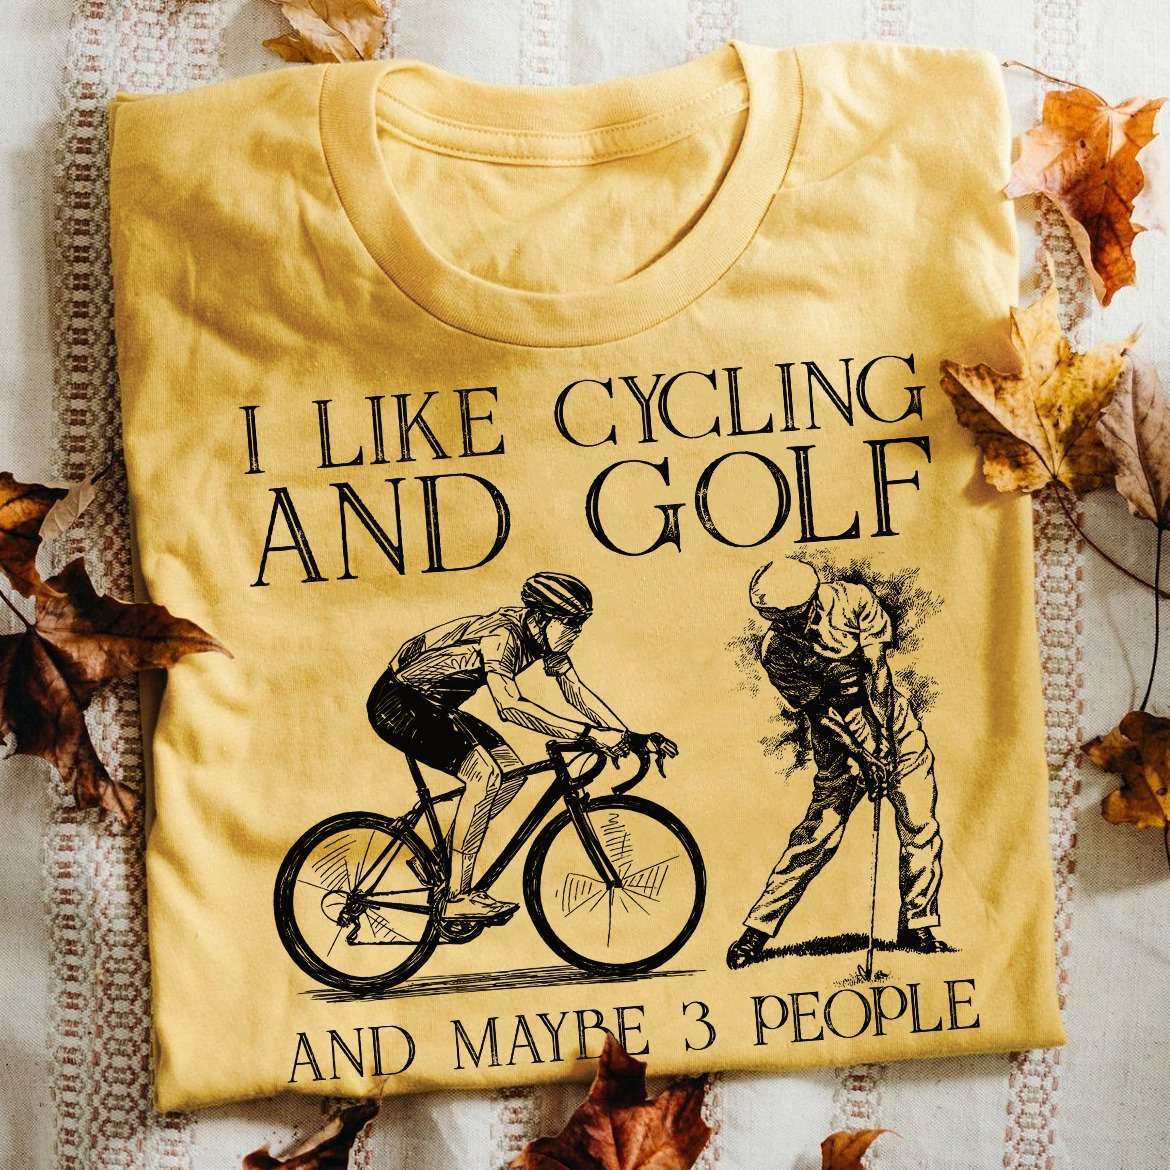 I like cycling and golf and maybe 3 people - Man golfer